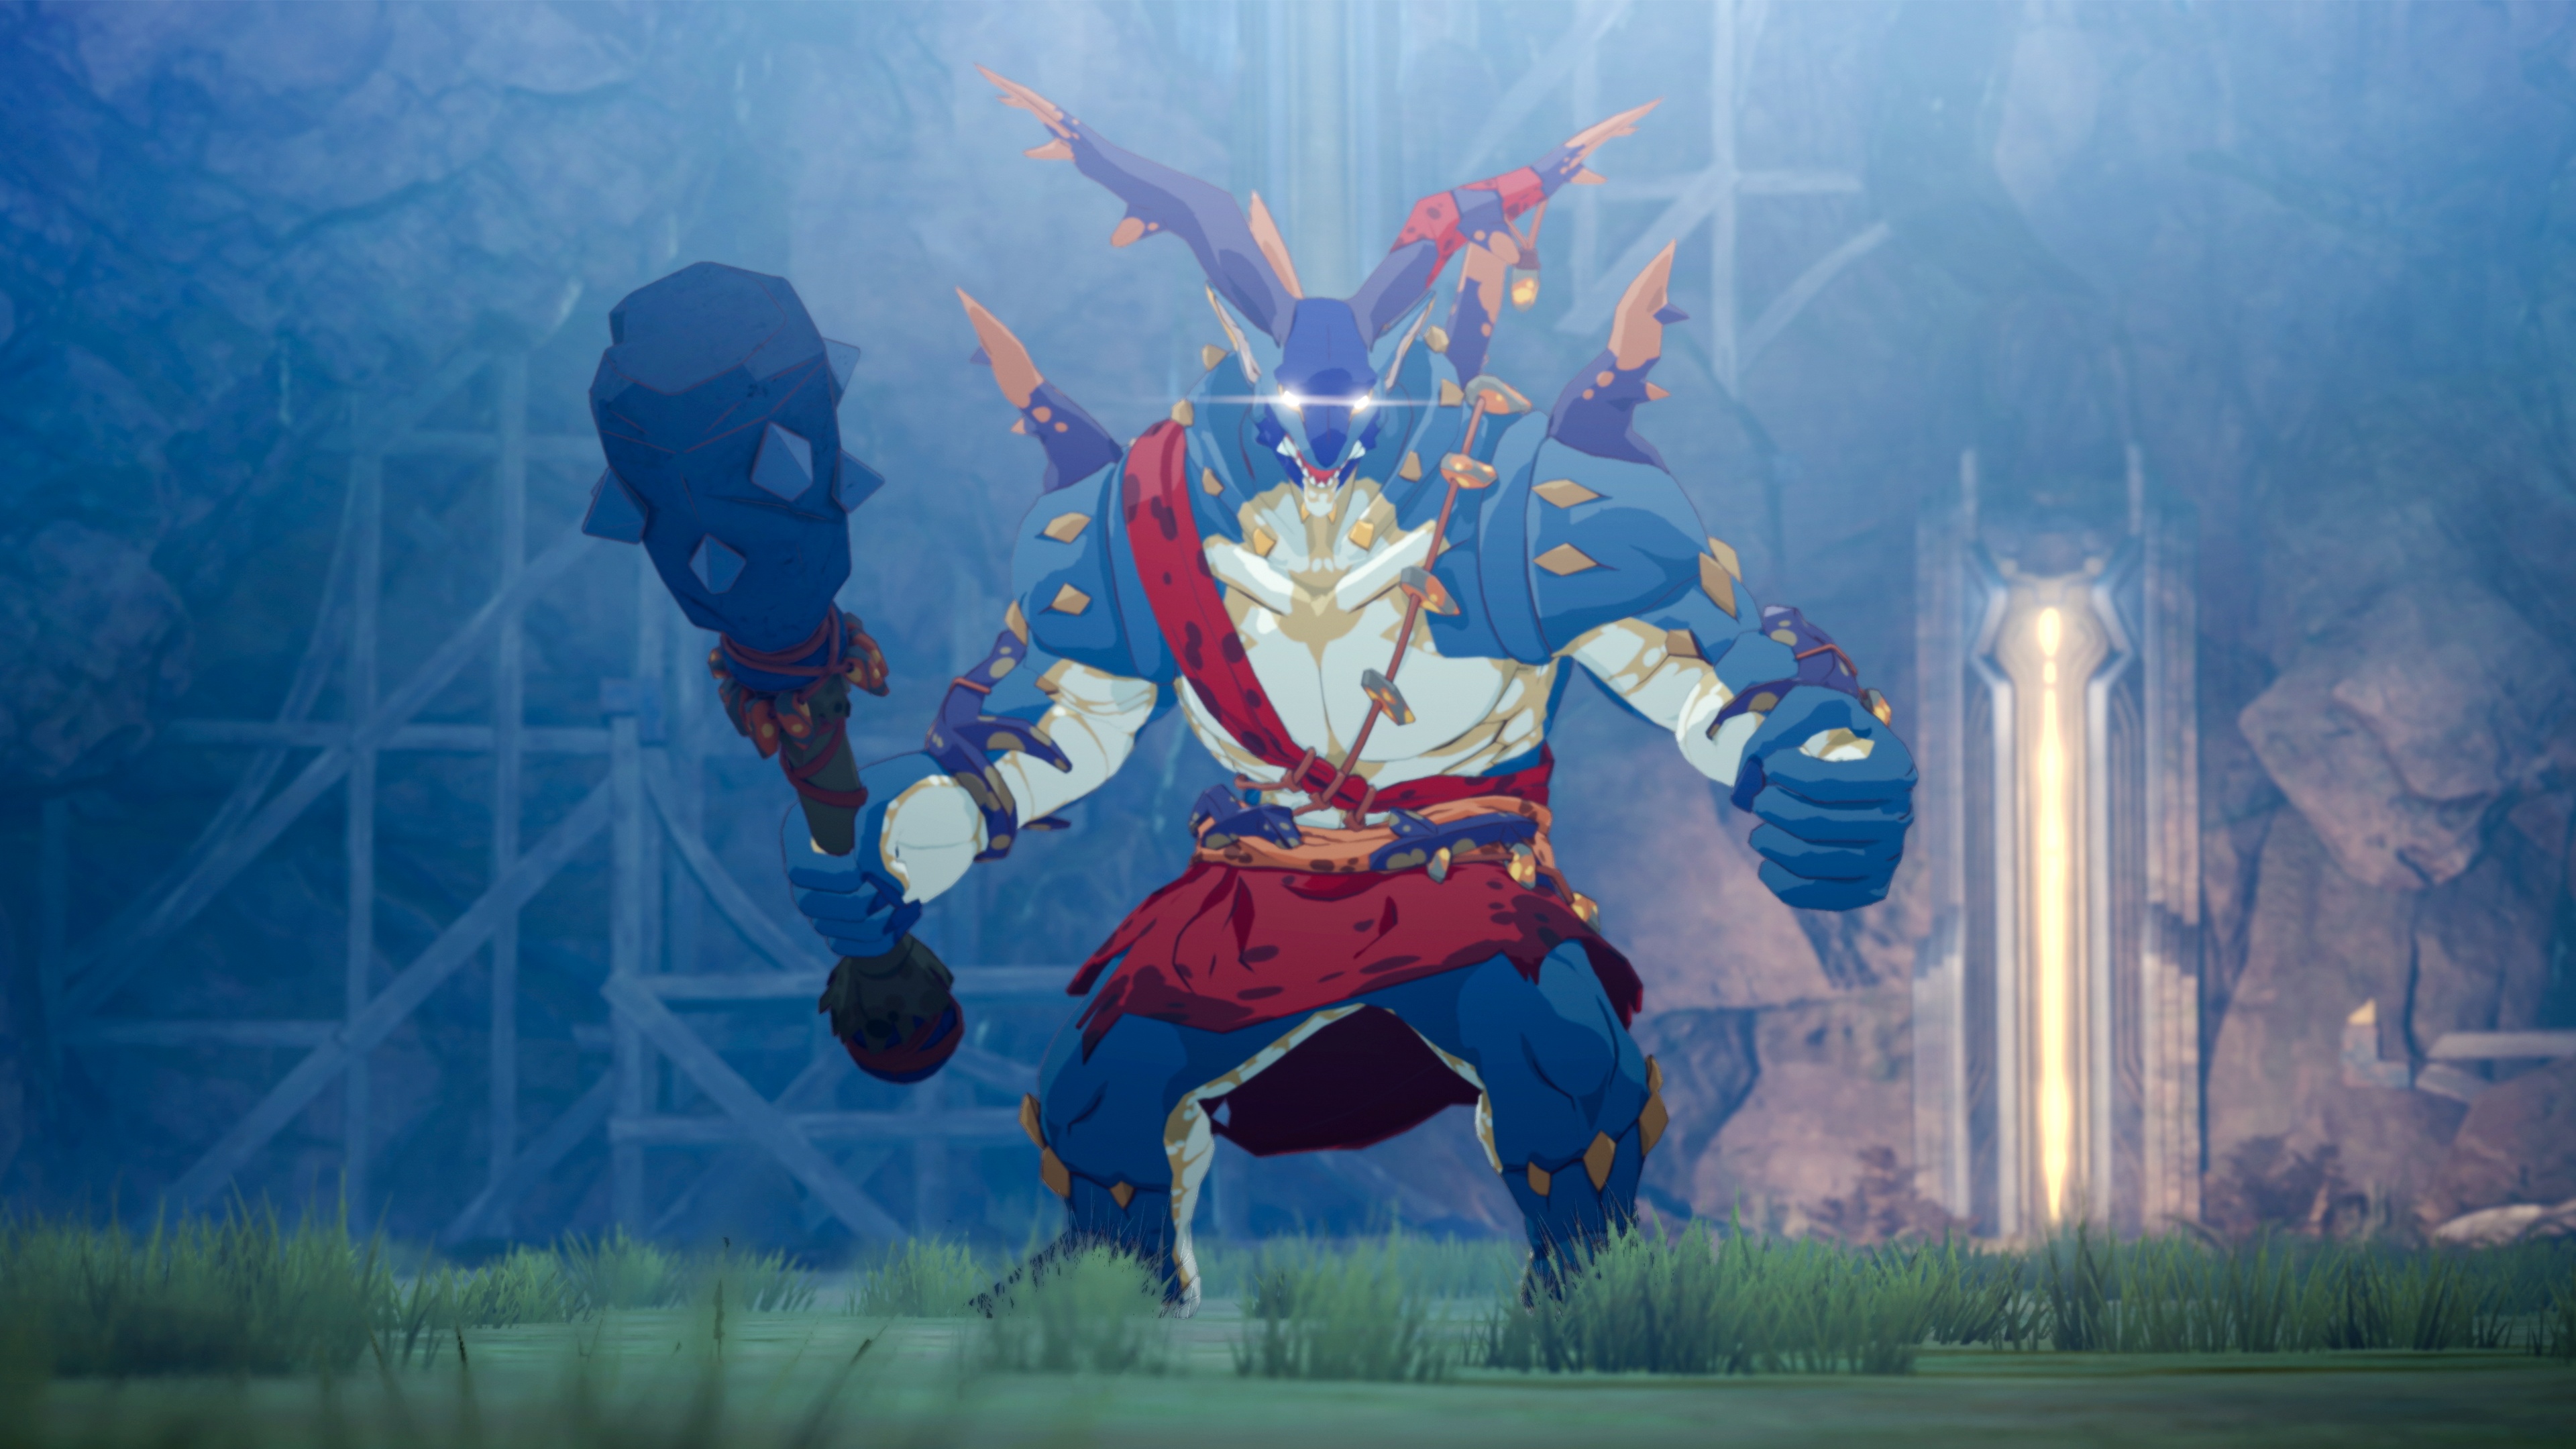 Blue Protocol is  and Bandai Namco's new action RPG, and Genshin  Impact's latest rival